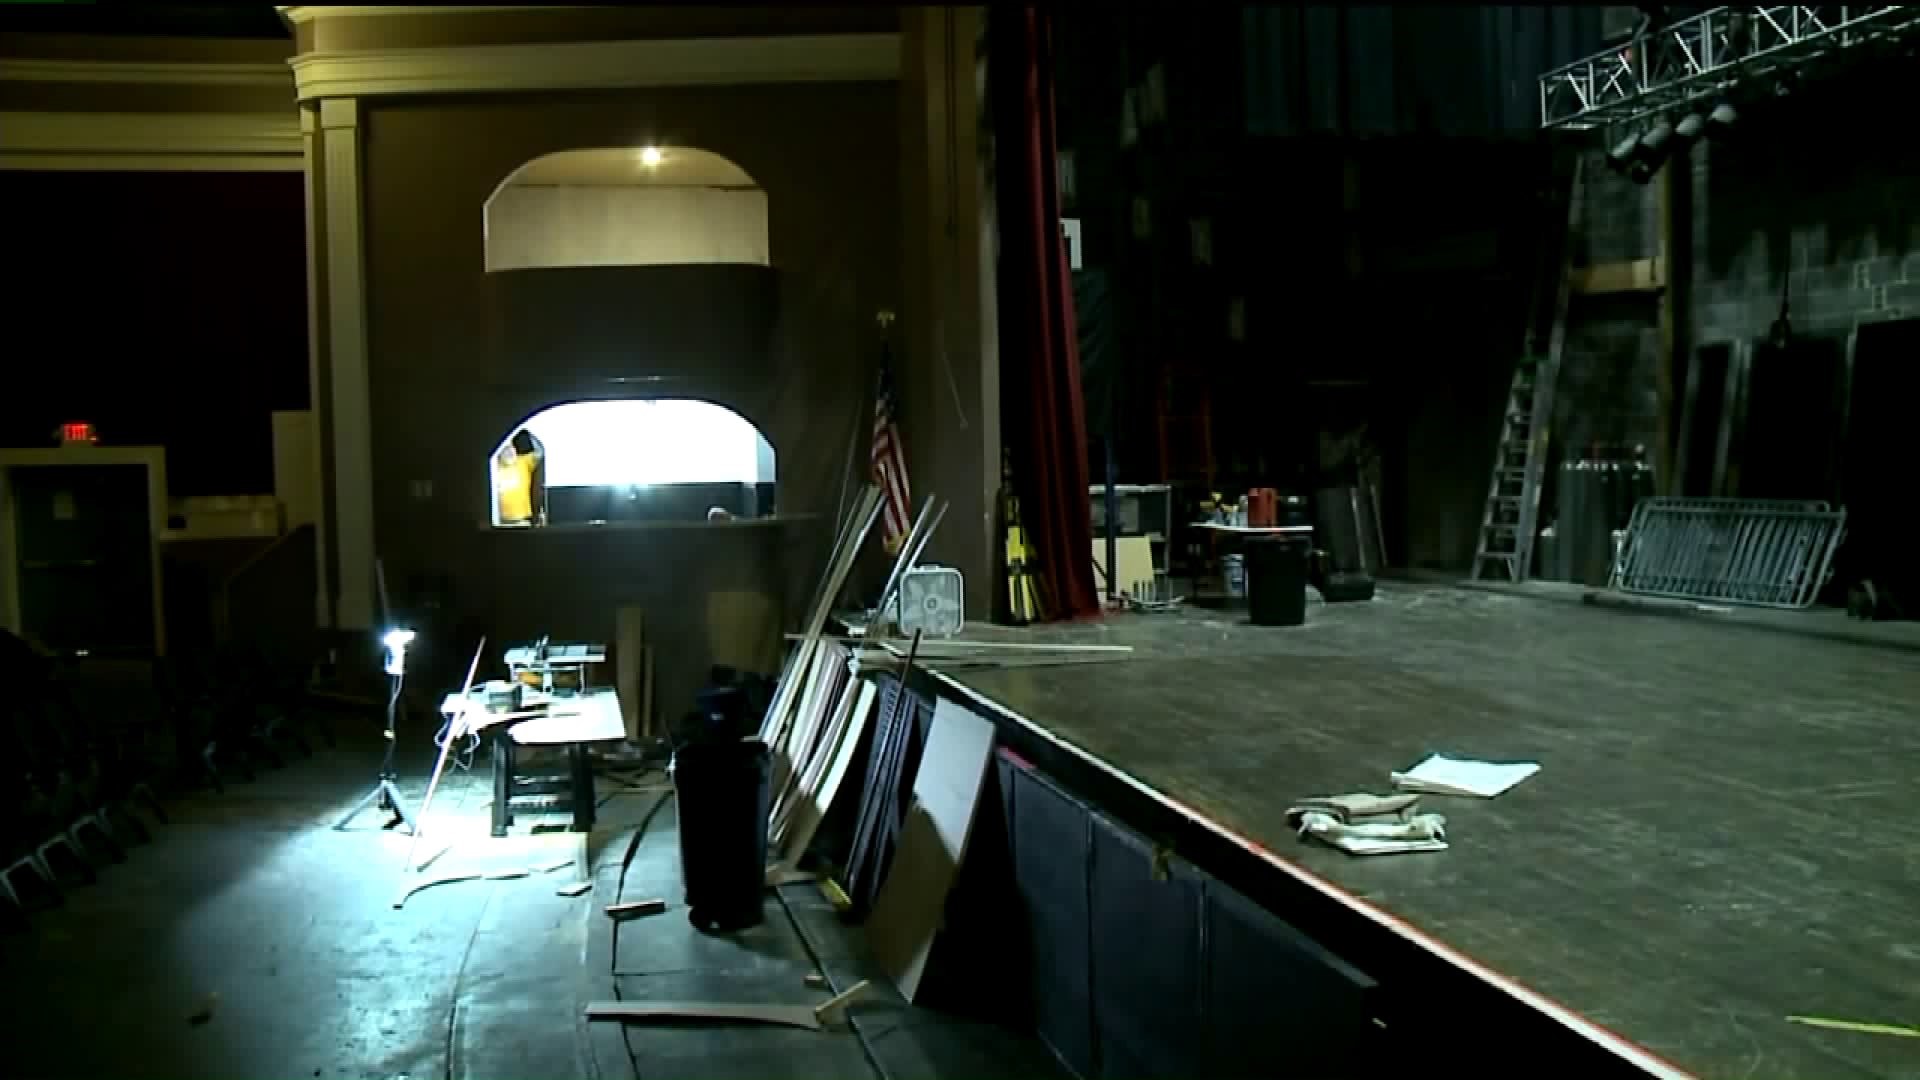 A Helping Hand: Upgrades For Sherman Theater